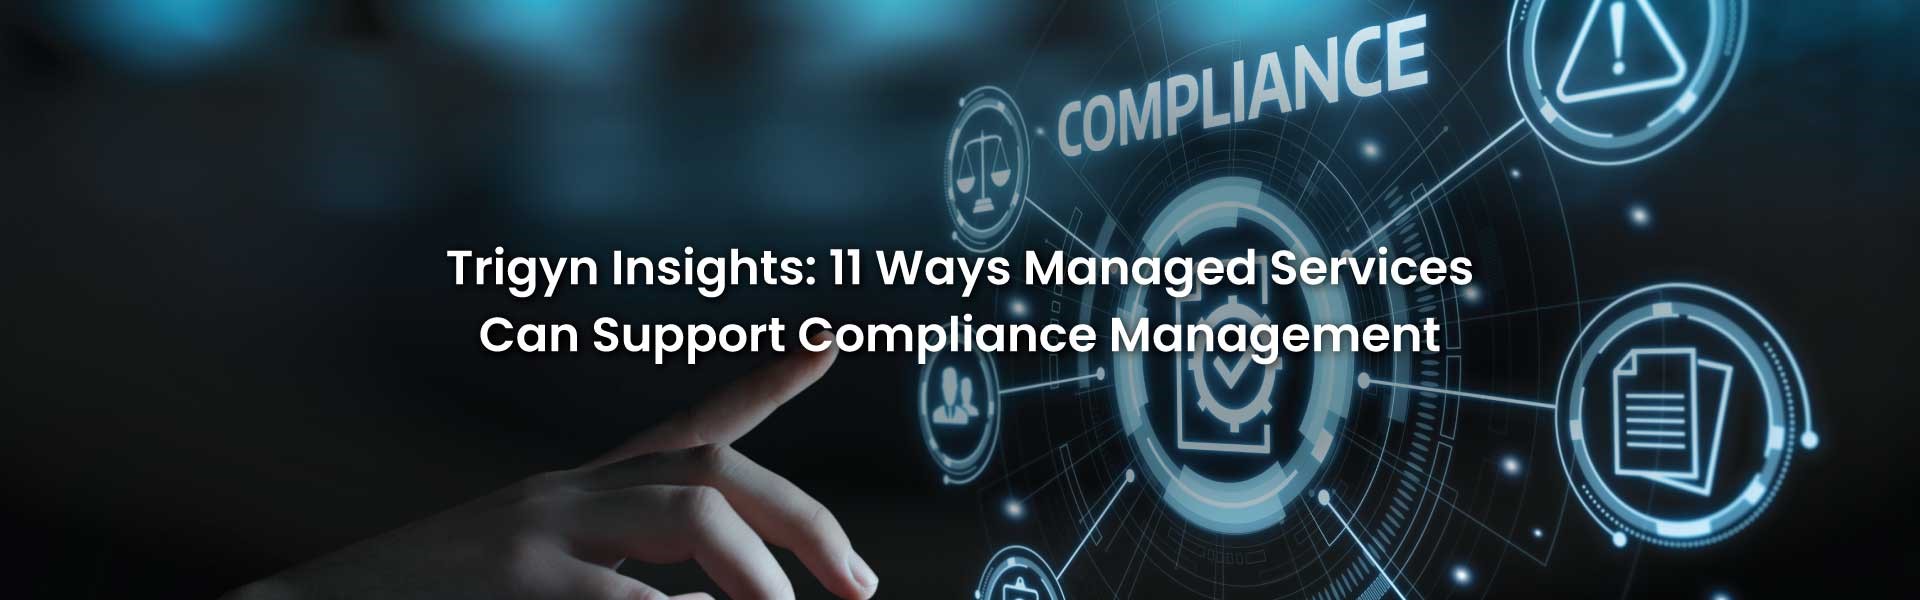 Managed Services Can Support Compliance Management